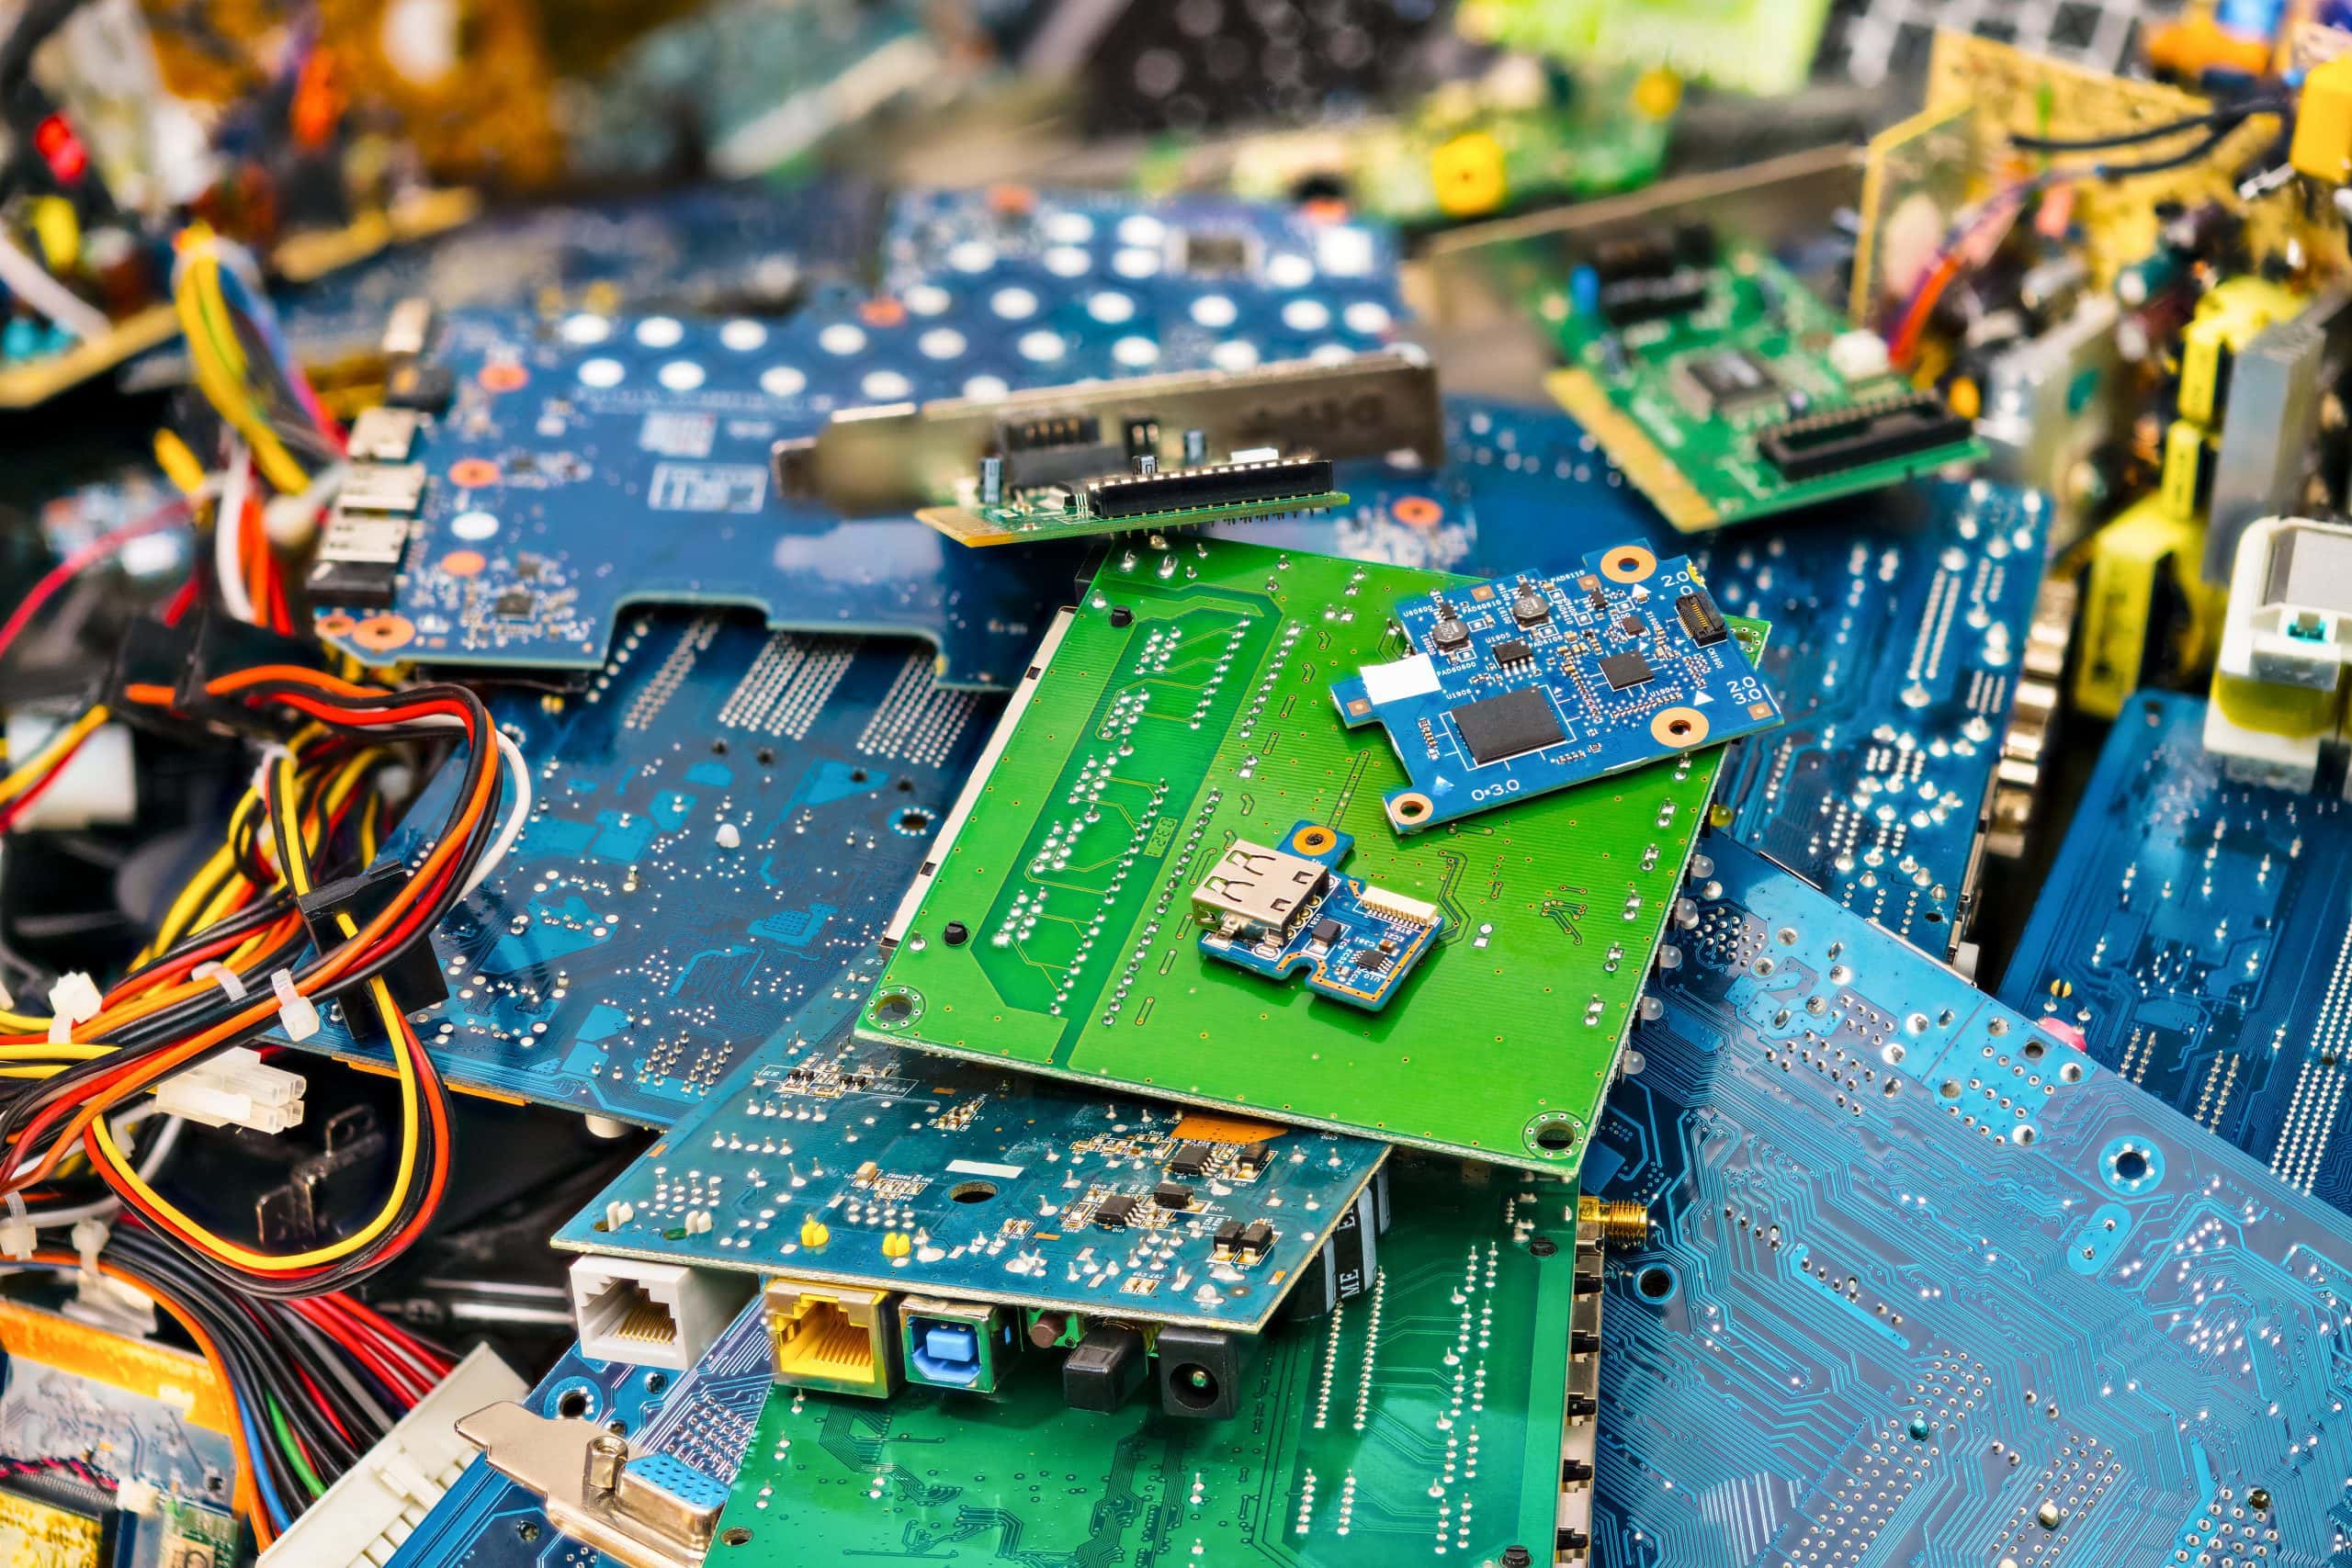 BTC produces huge amounts of electronic waste that should be talked about